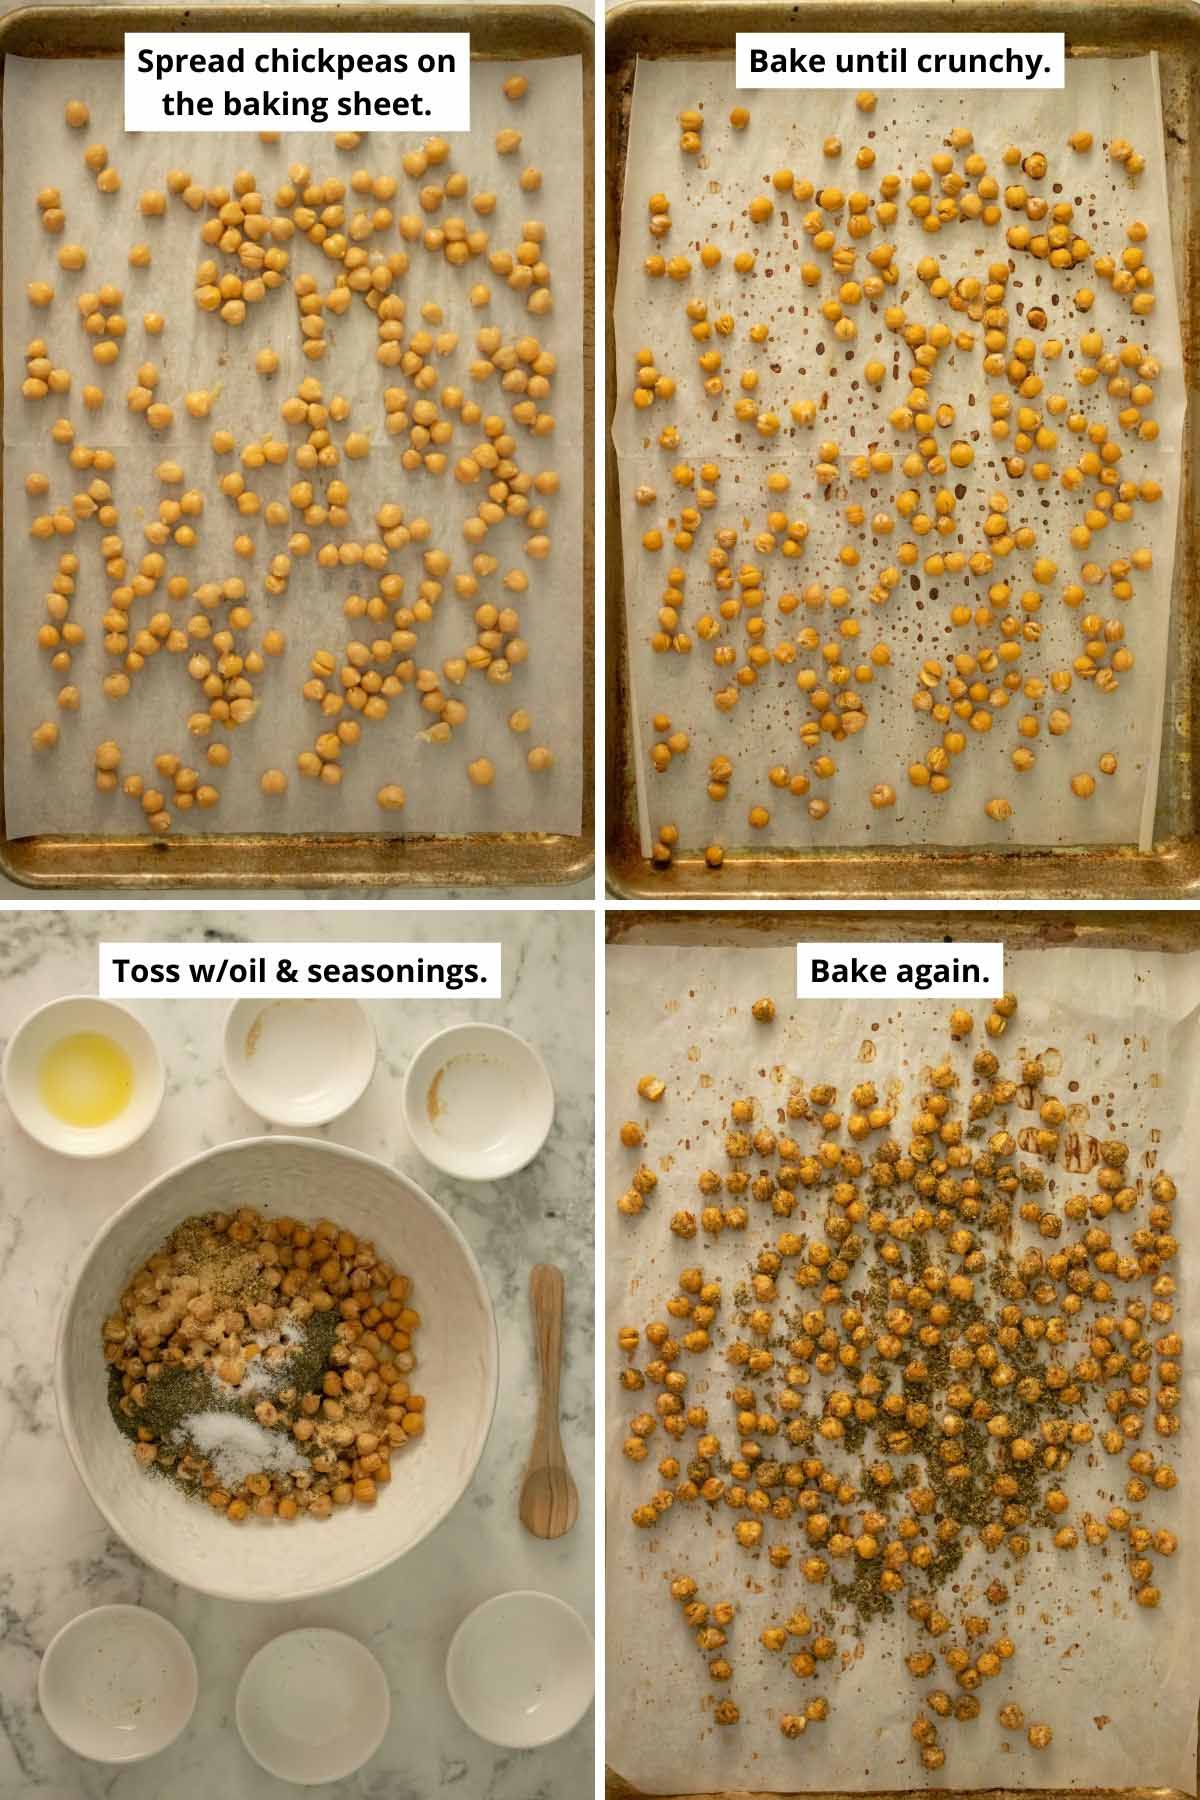 image collage showing chickpeas on the baking sheet before and after roasting, then in a bowl with seasonings and on the baking sheet again